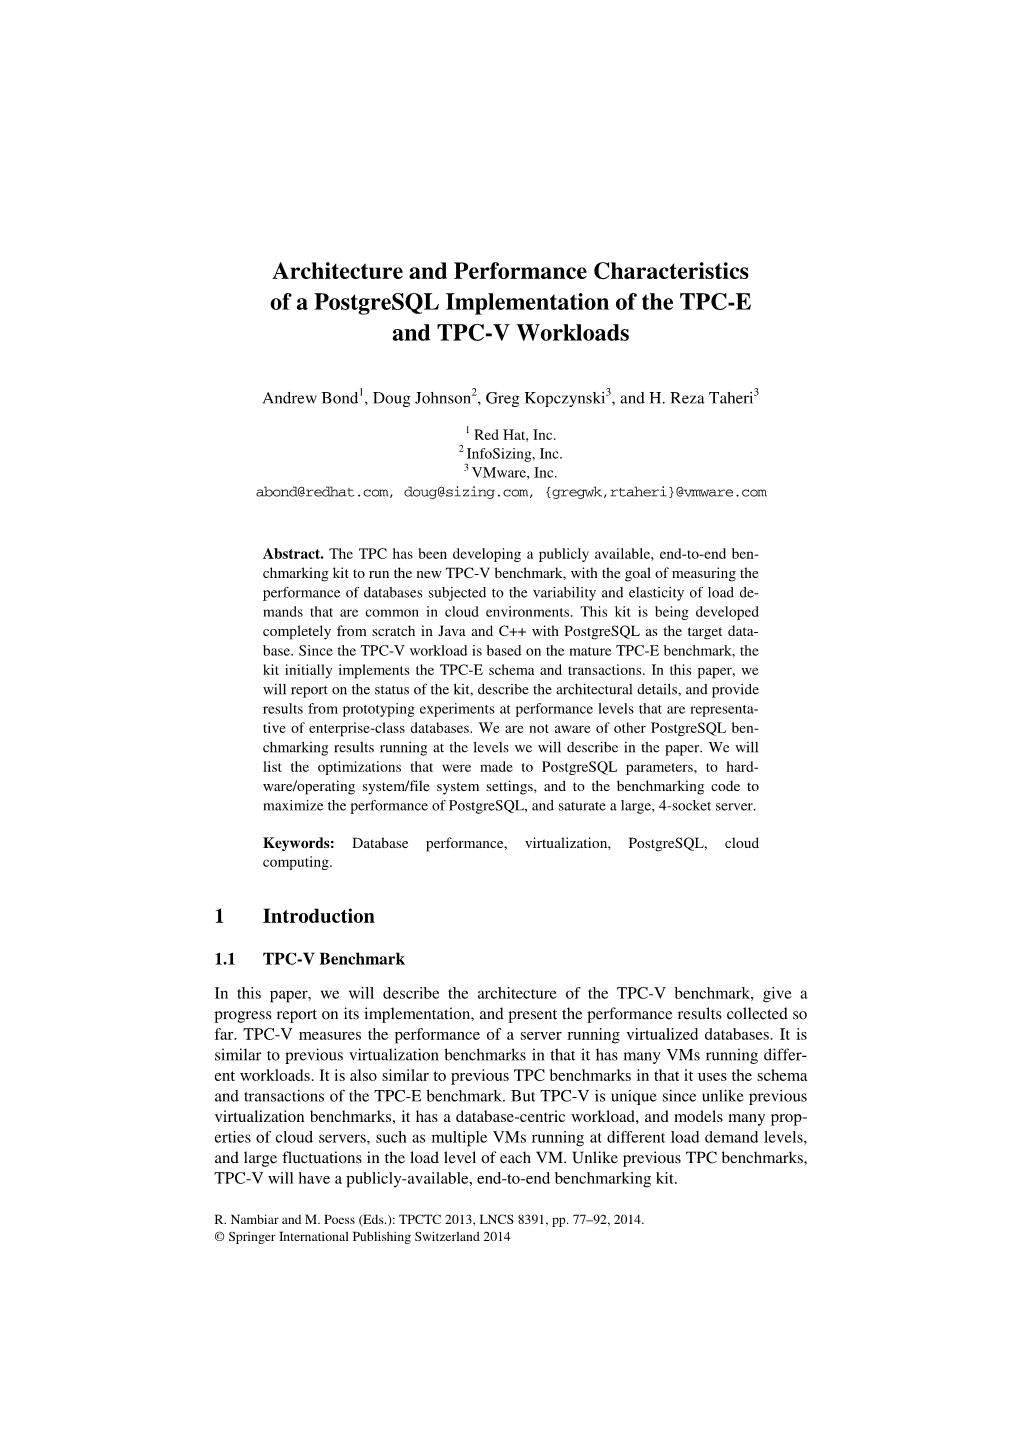 Architecture and Performance Characteristics of a Postgresql Implementation of the TPC-E and TPC-V Workloads